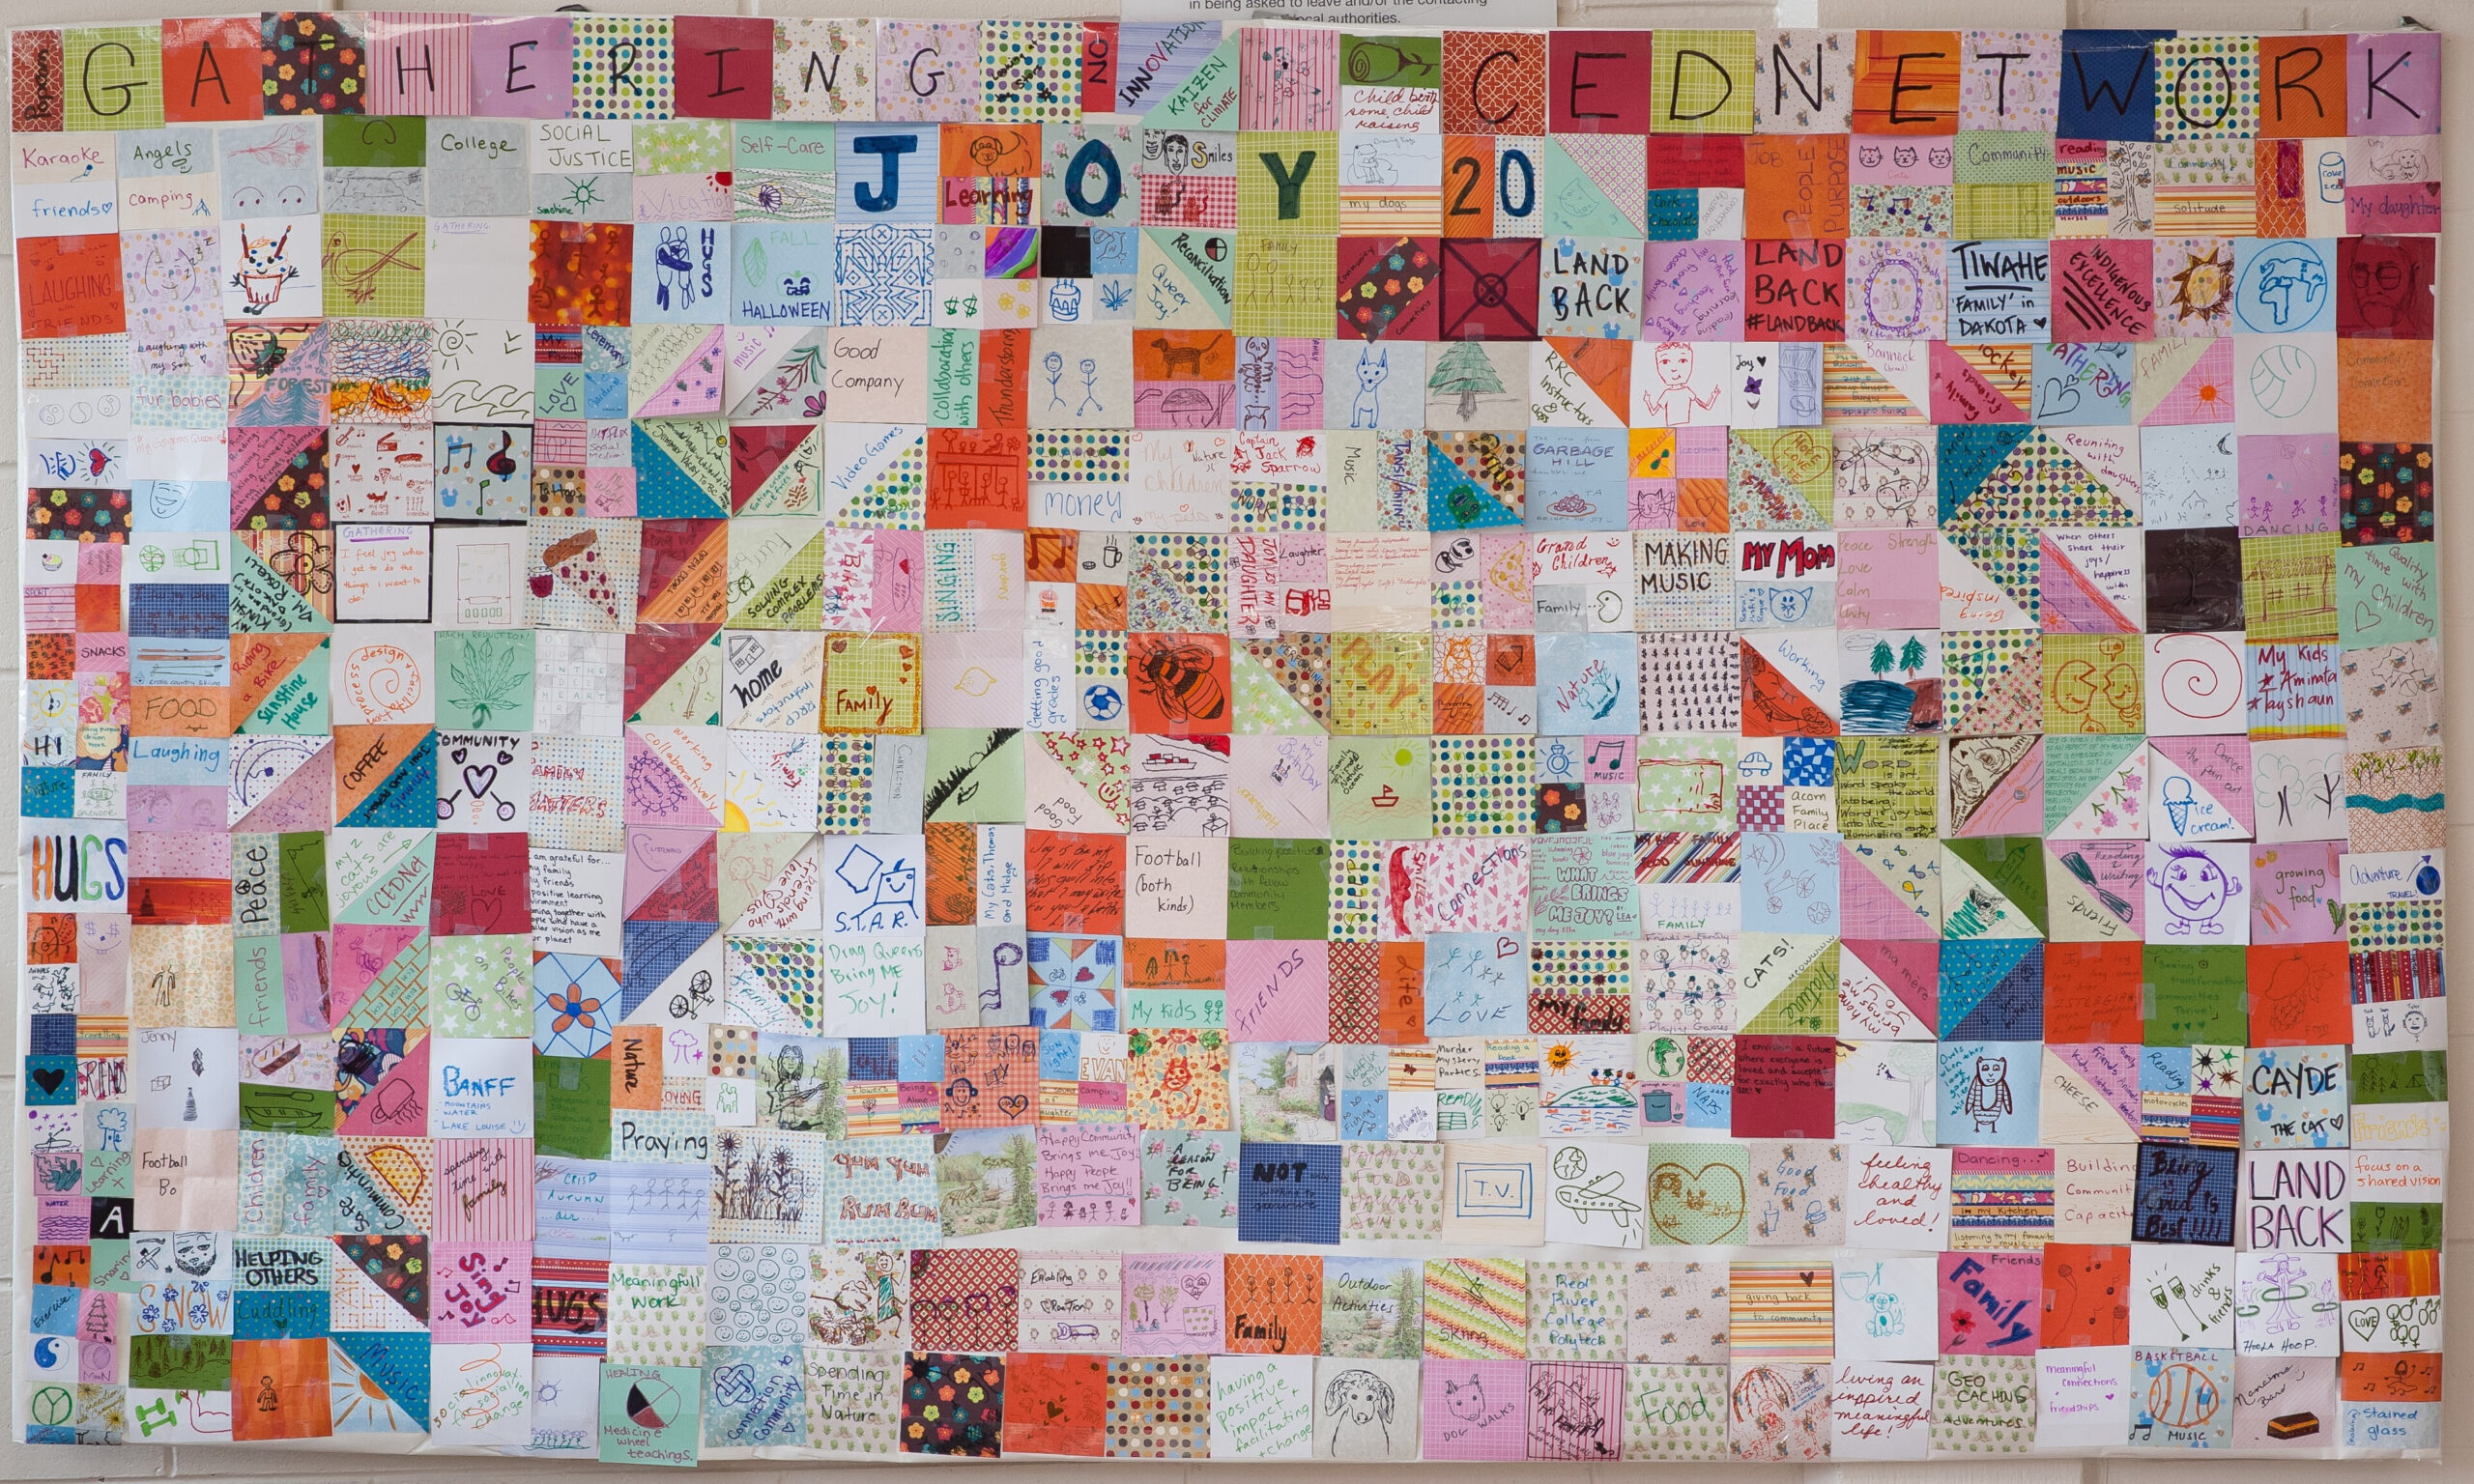 A patchwork quilt made from pieces of paper on which Manitoba Gathering attendees answered the question, "what brings you joy?"